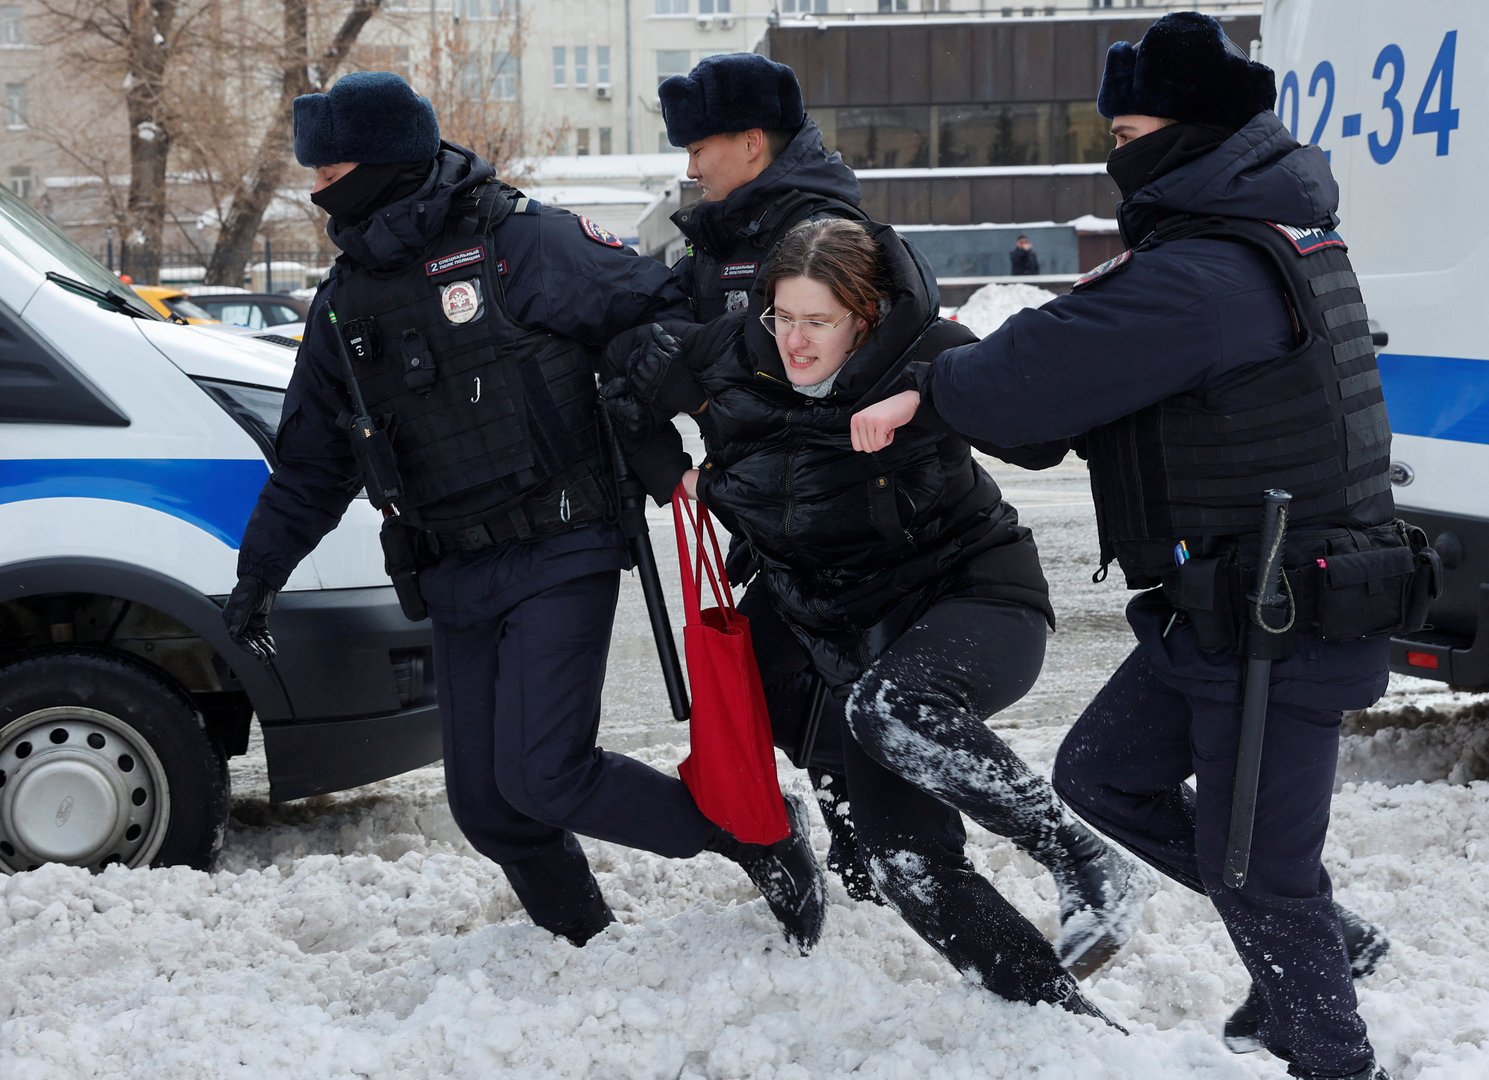 image At least 340 people detained in Russia at events in memory of Navalny (Update 2)